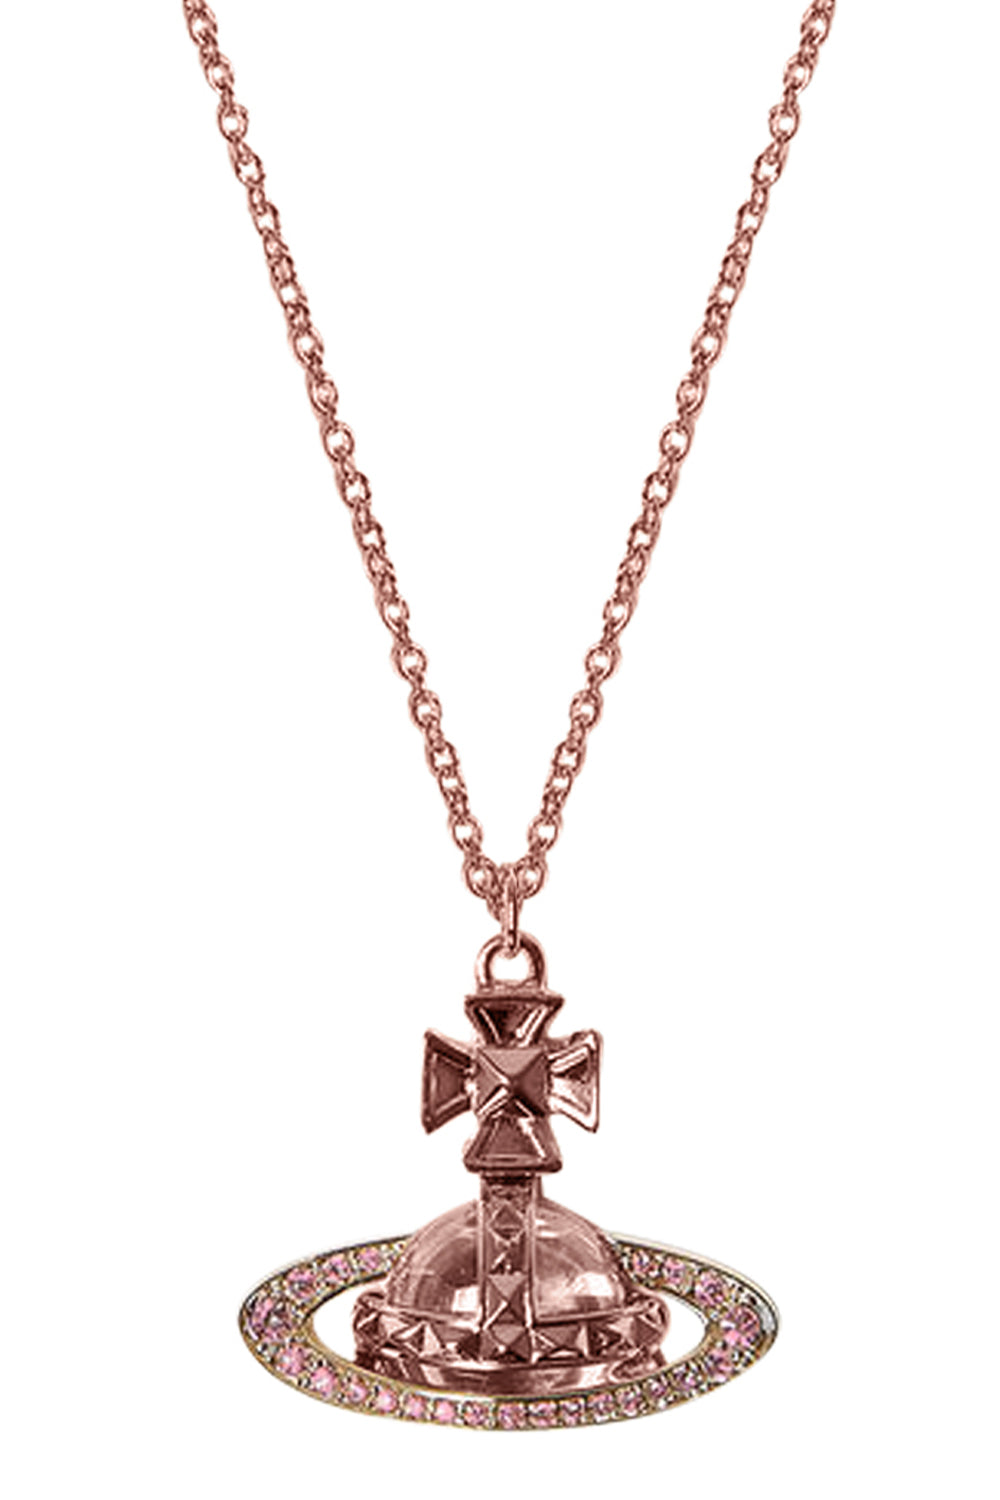 VIVIENNE WESTWOOD Accessories MULTI PINA SMALL BAS RELIEF PENDANT | PINK GOLD/ROSE